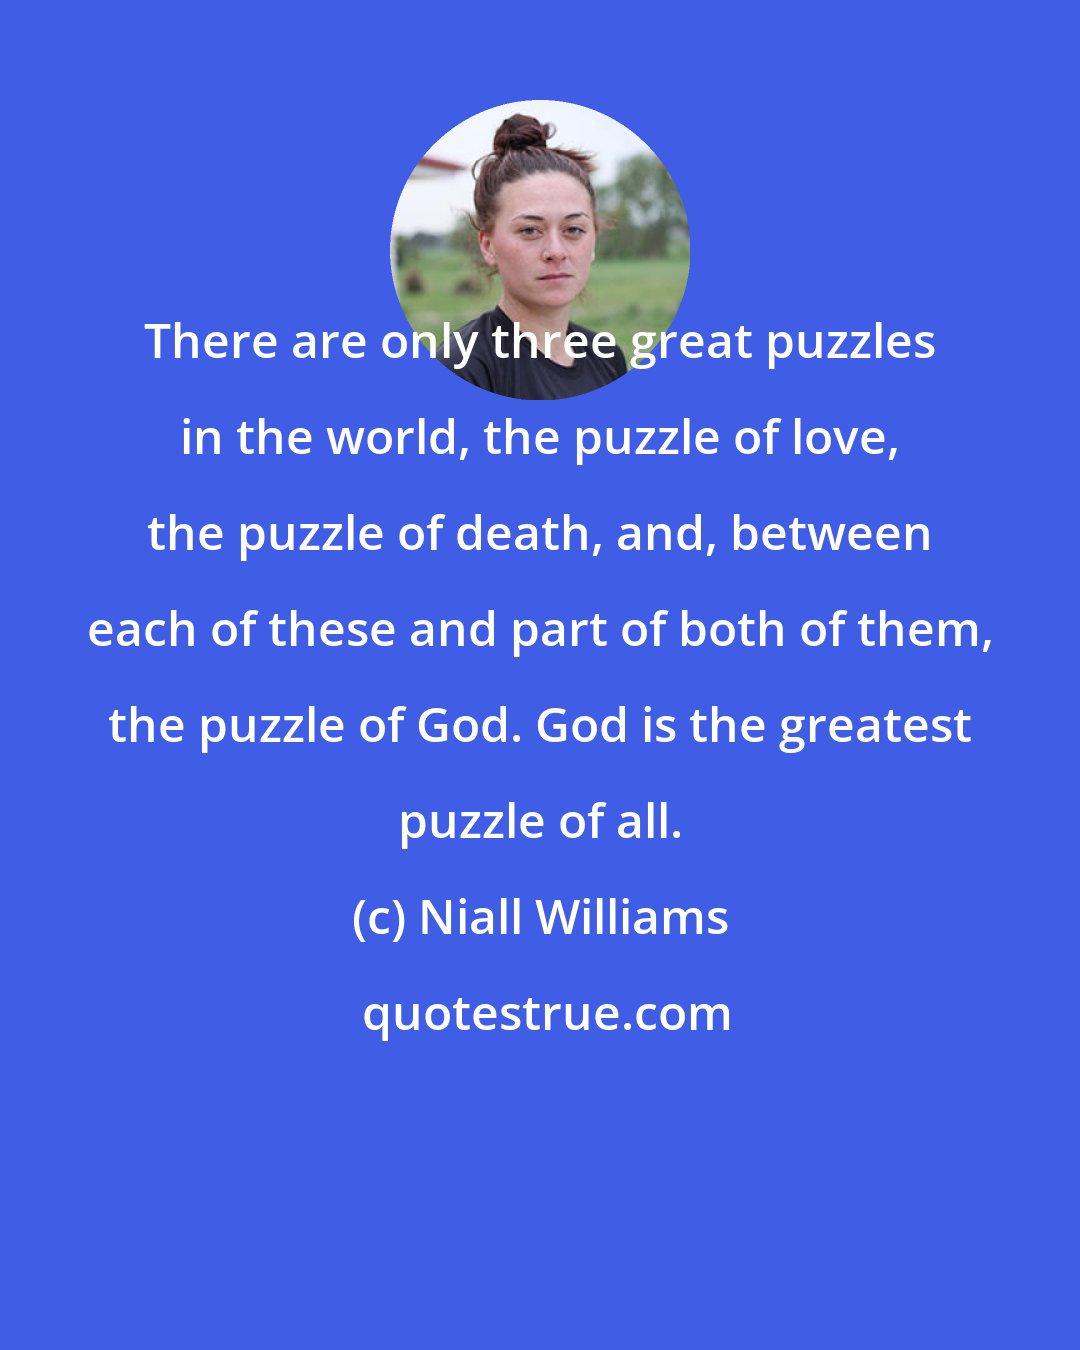 Niall Williams: There are only three great puzzles in the world, the puzzle of love, the puzzle of death, and, between each of these and part of both of them, the puzzle of God. God is the greatest puzzle of all.